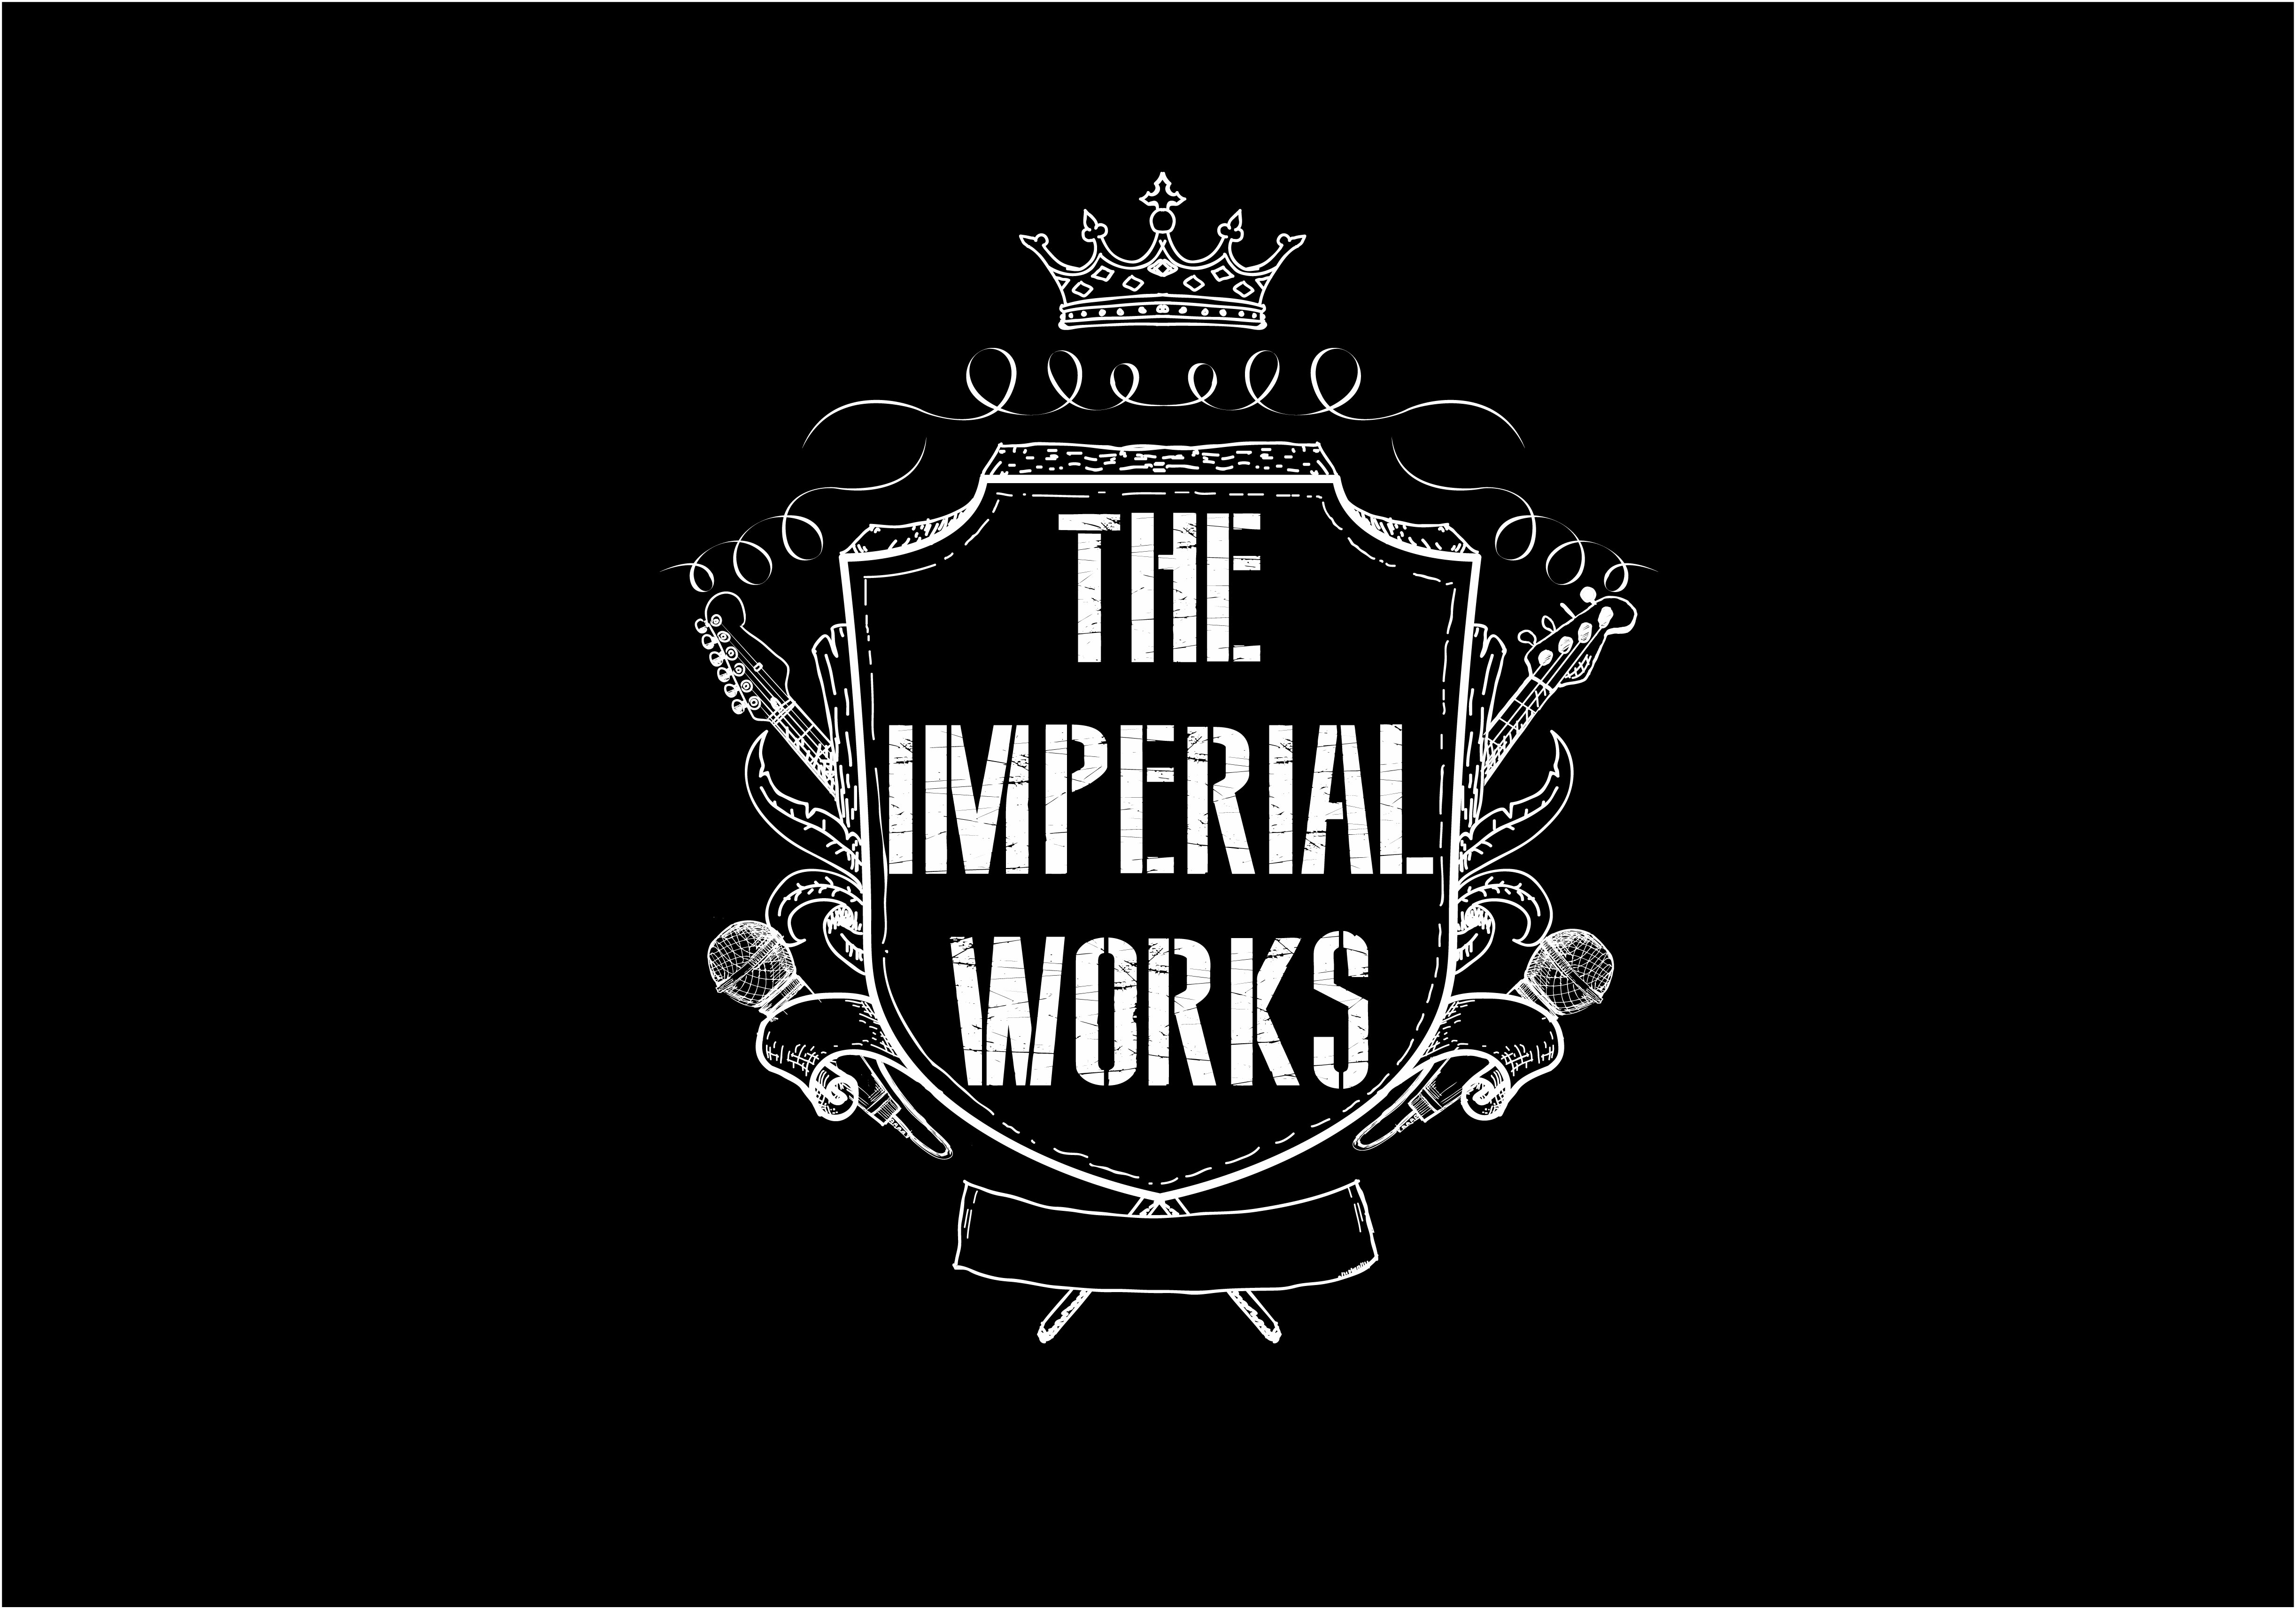 THE IMPERIAL WORKS